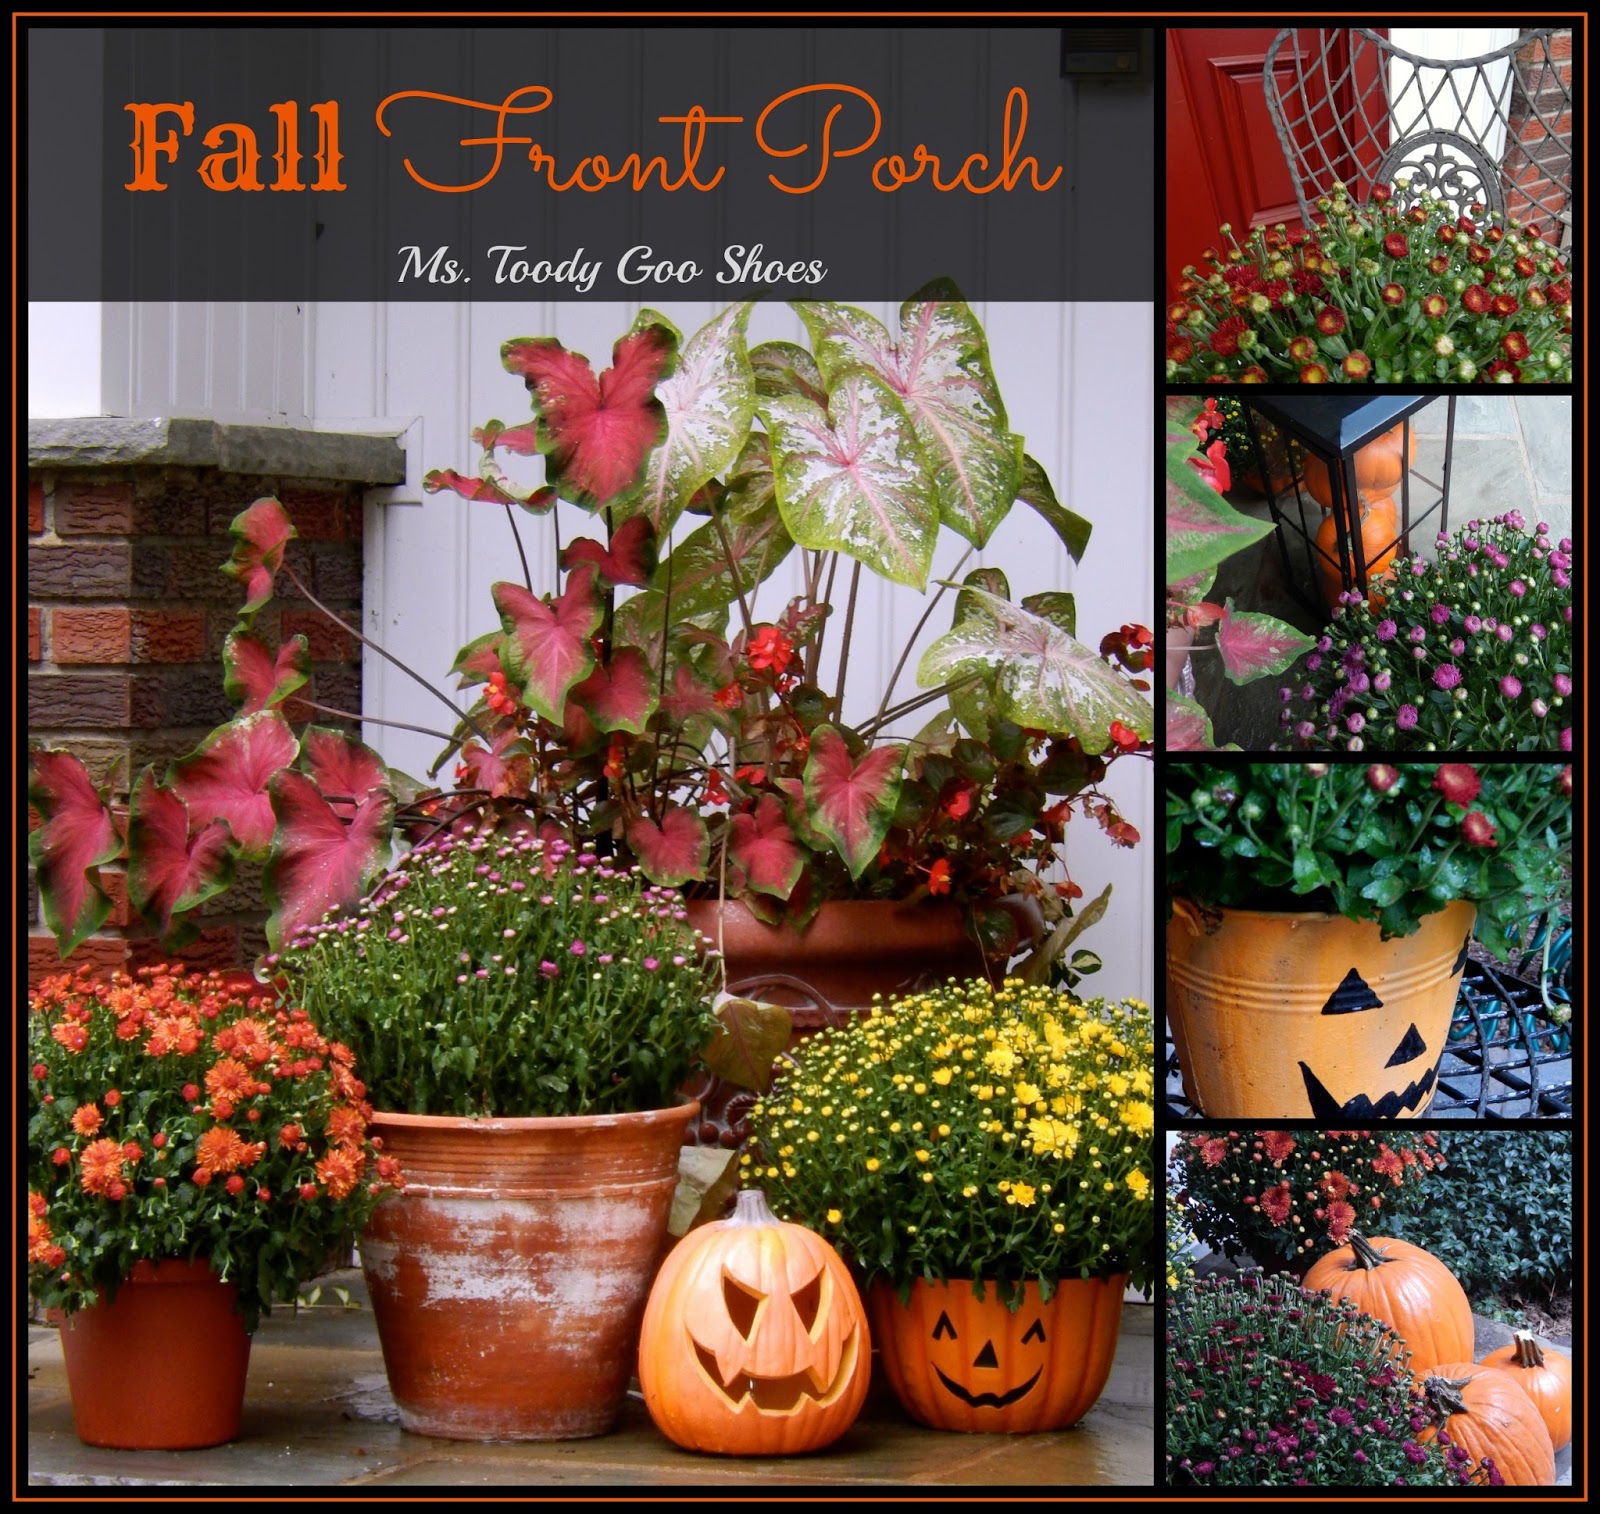 Fall Front Porch by Ms. Toody Goo Shoes